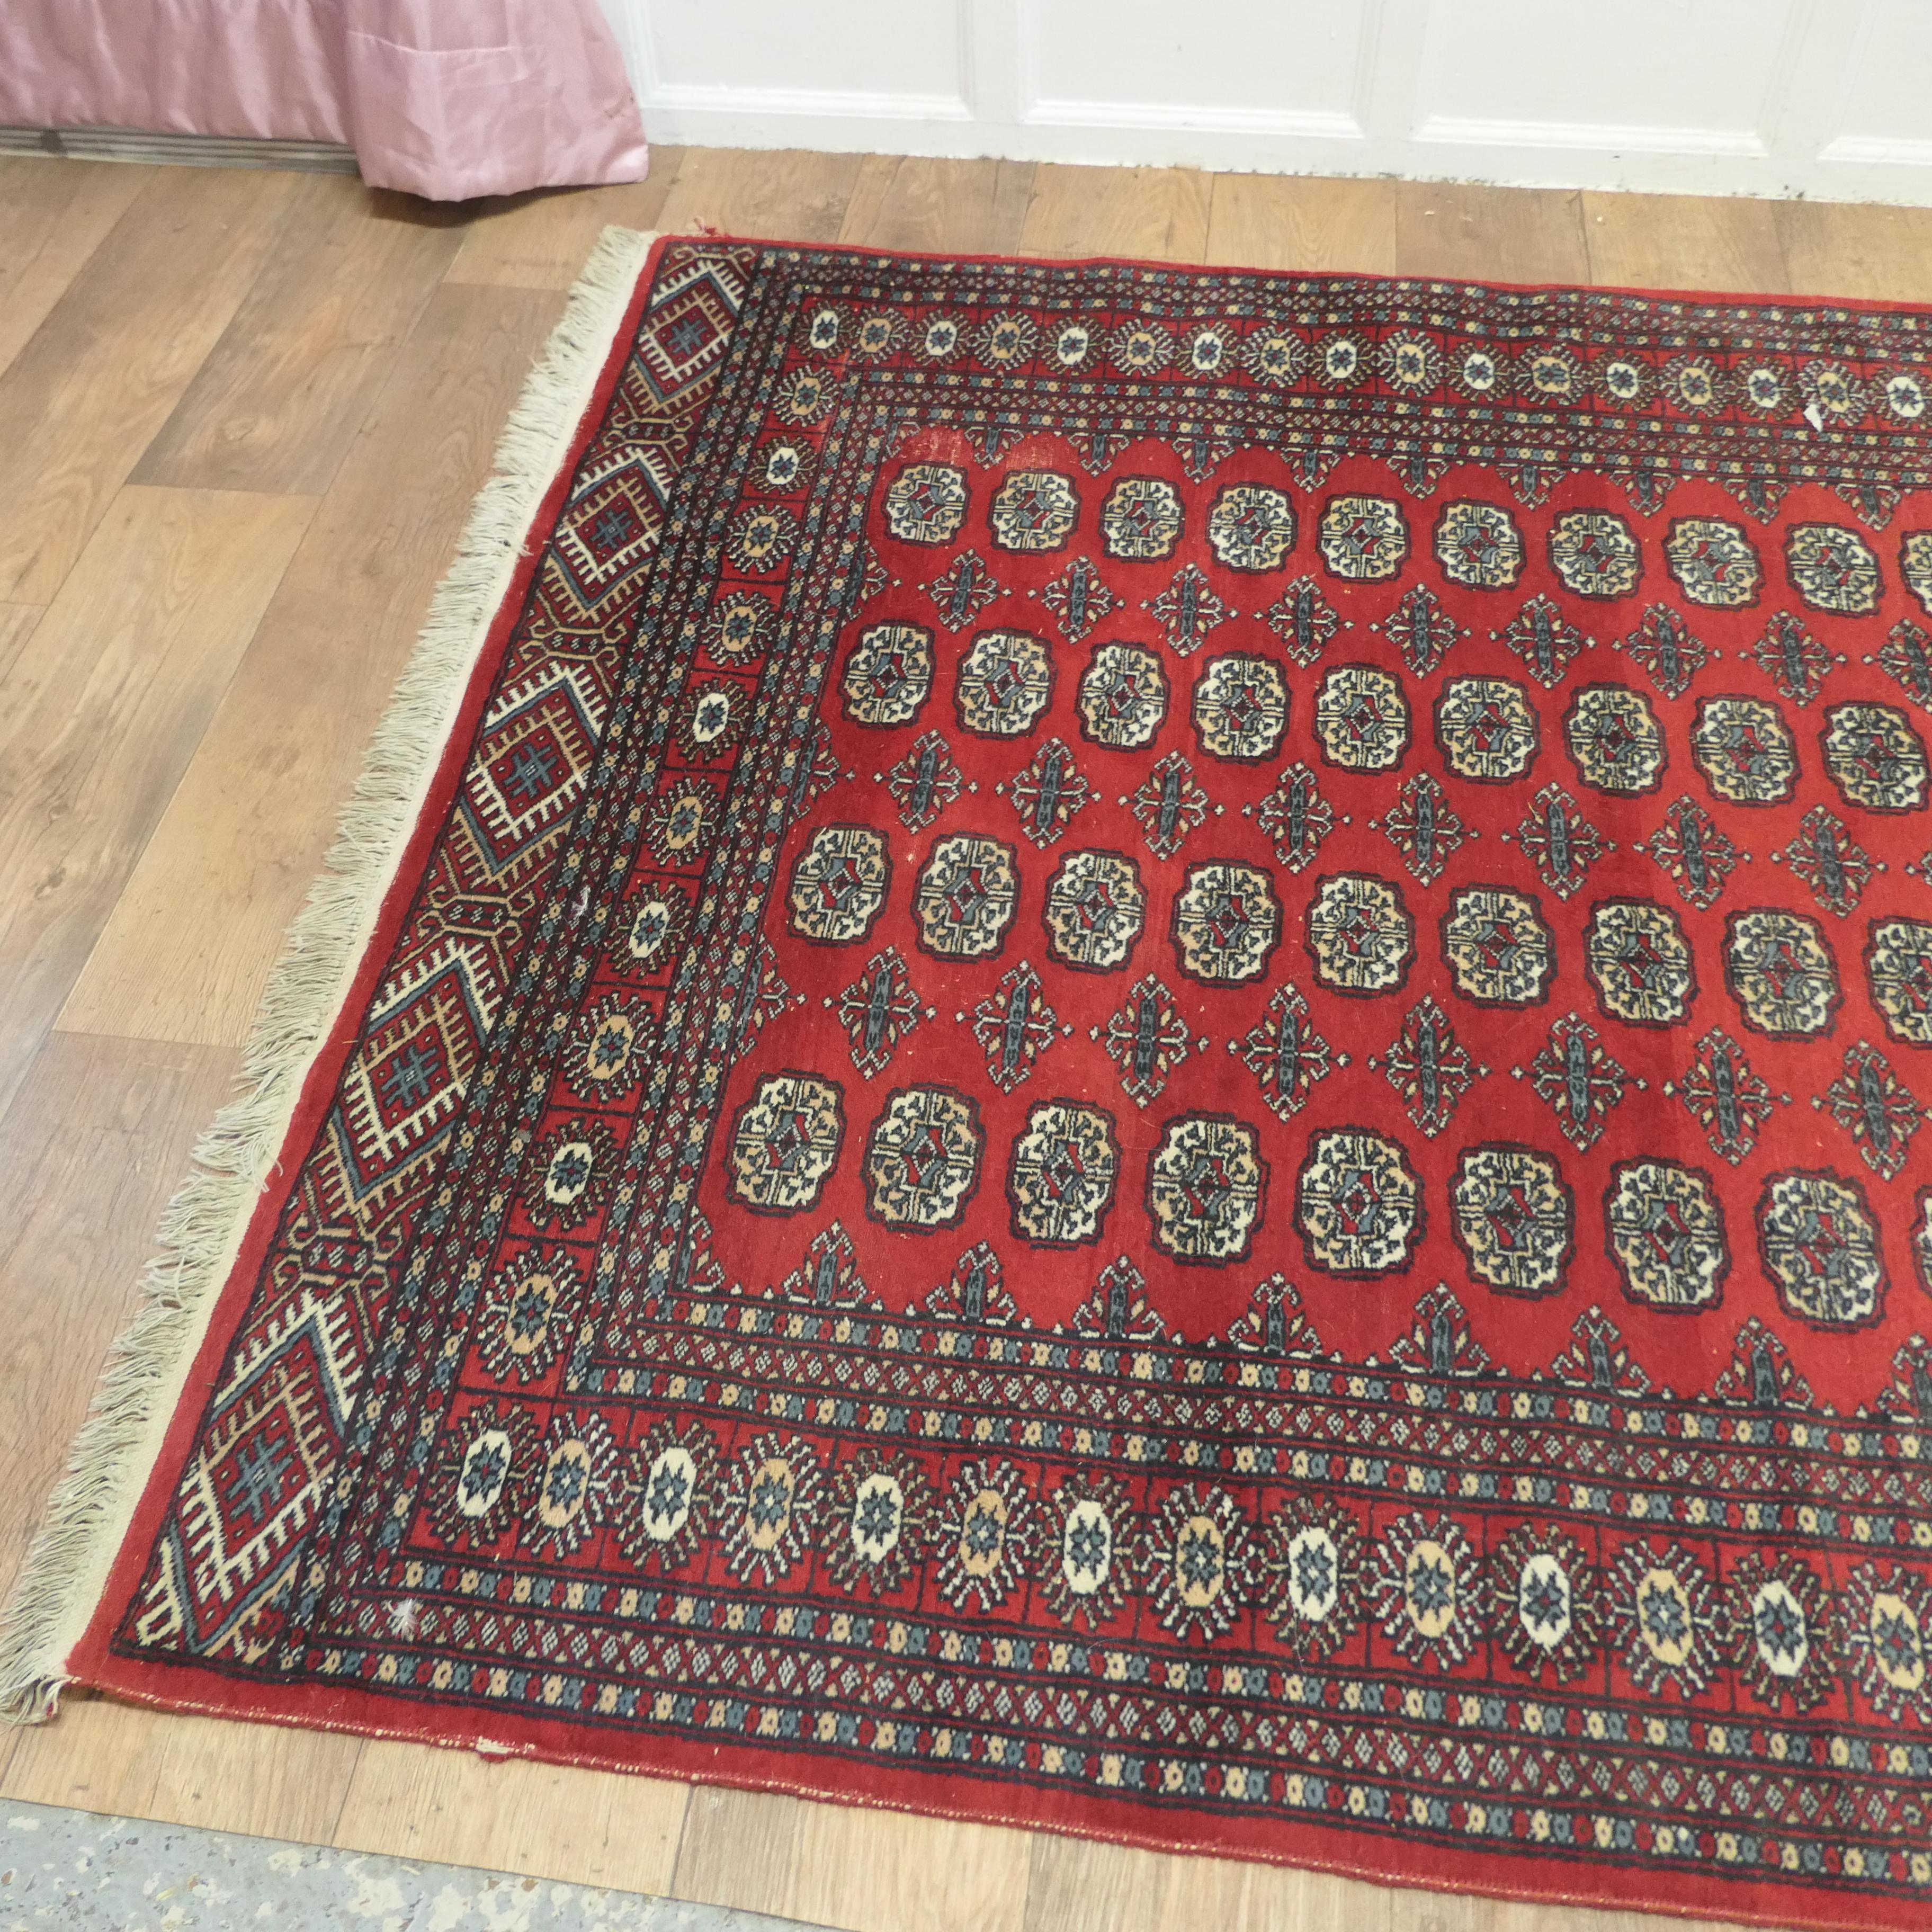 A Lovely Bright Red Wool Rug  The Carpet is a wonderful Bright colour   For Sale 7